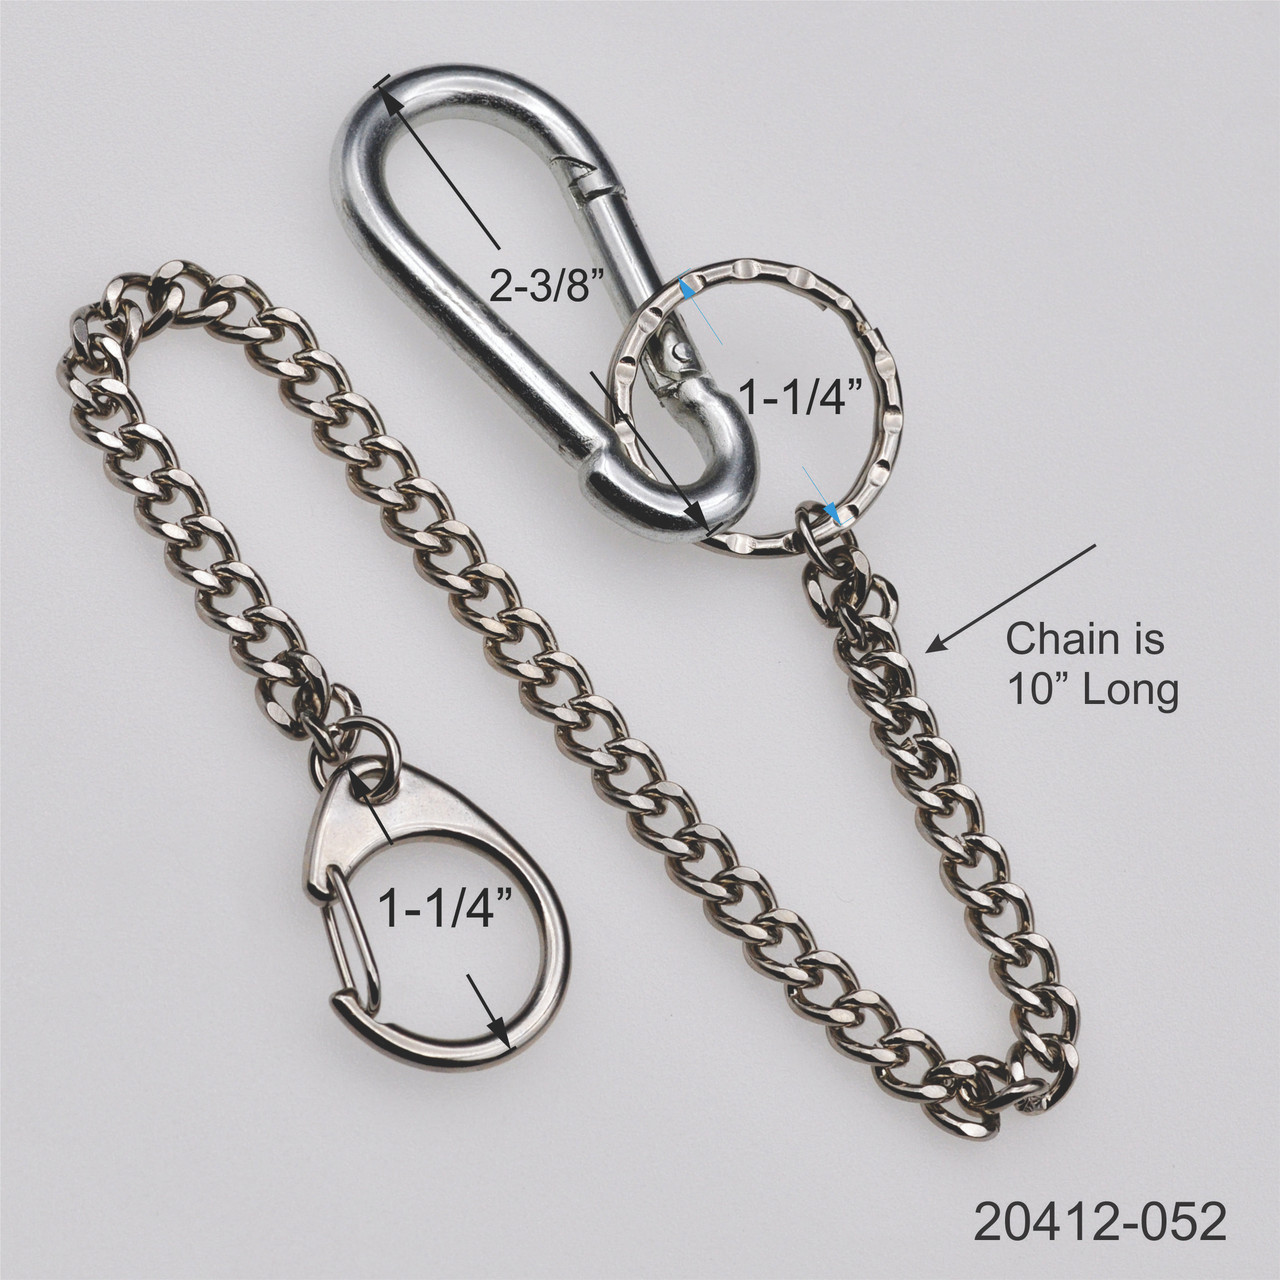 Stainless Steel Carabiner Key-Chain — WE ARE ALL SMITH